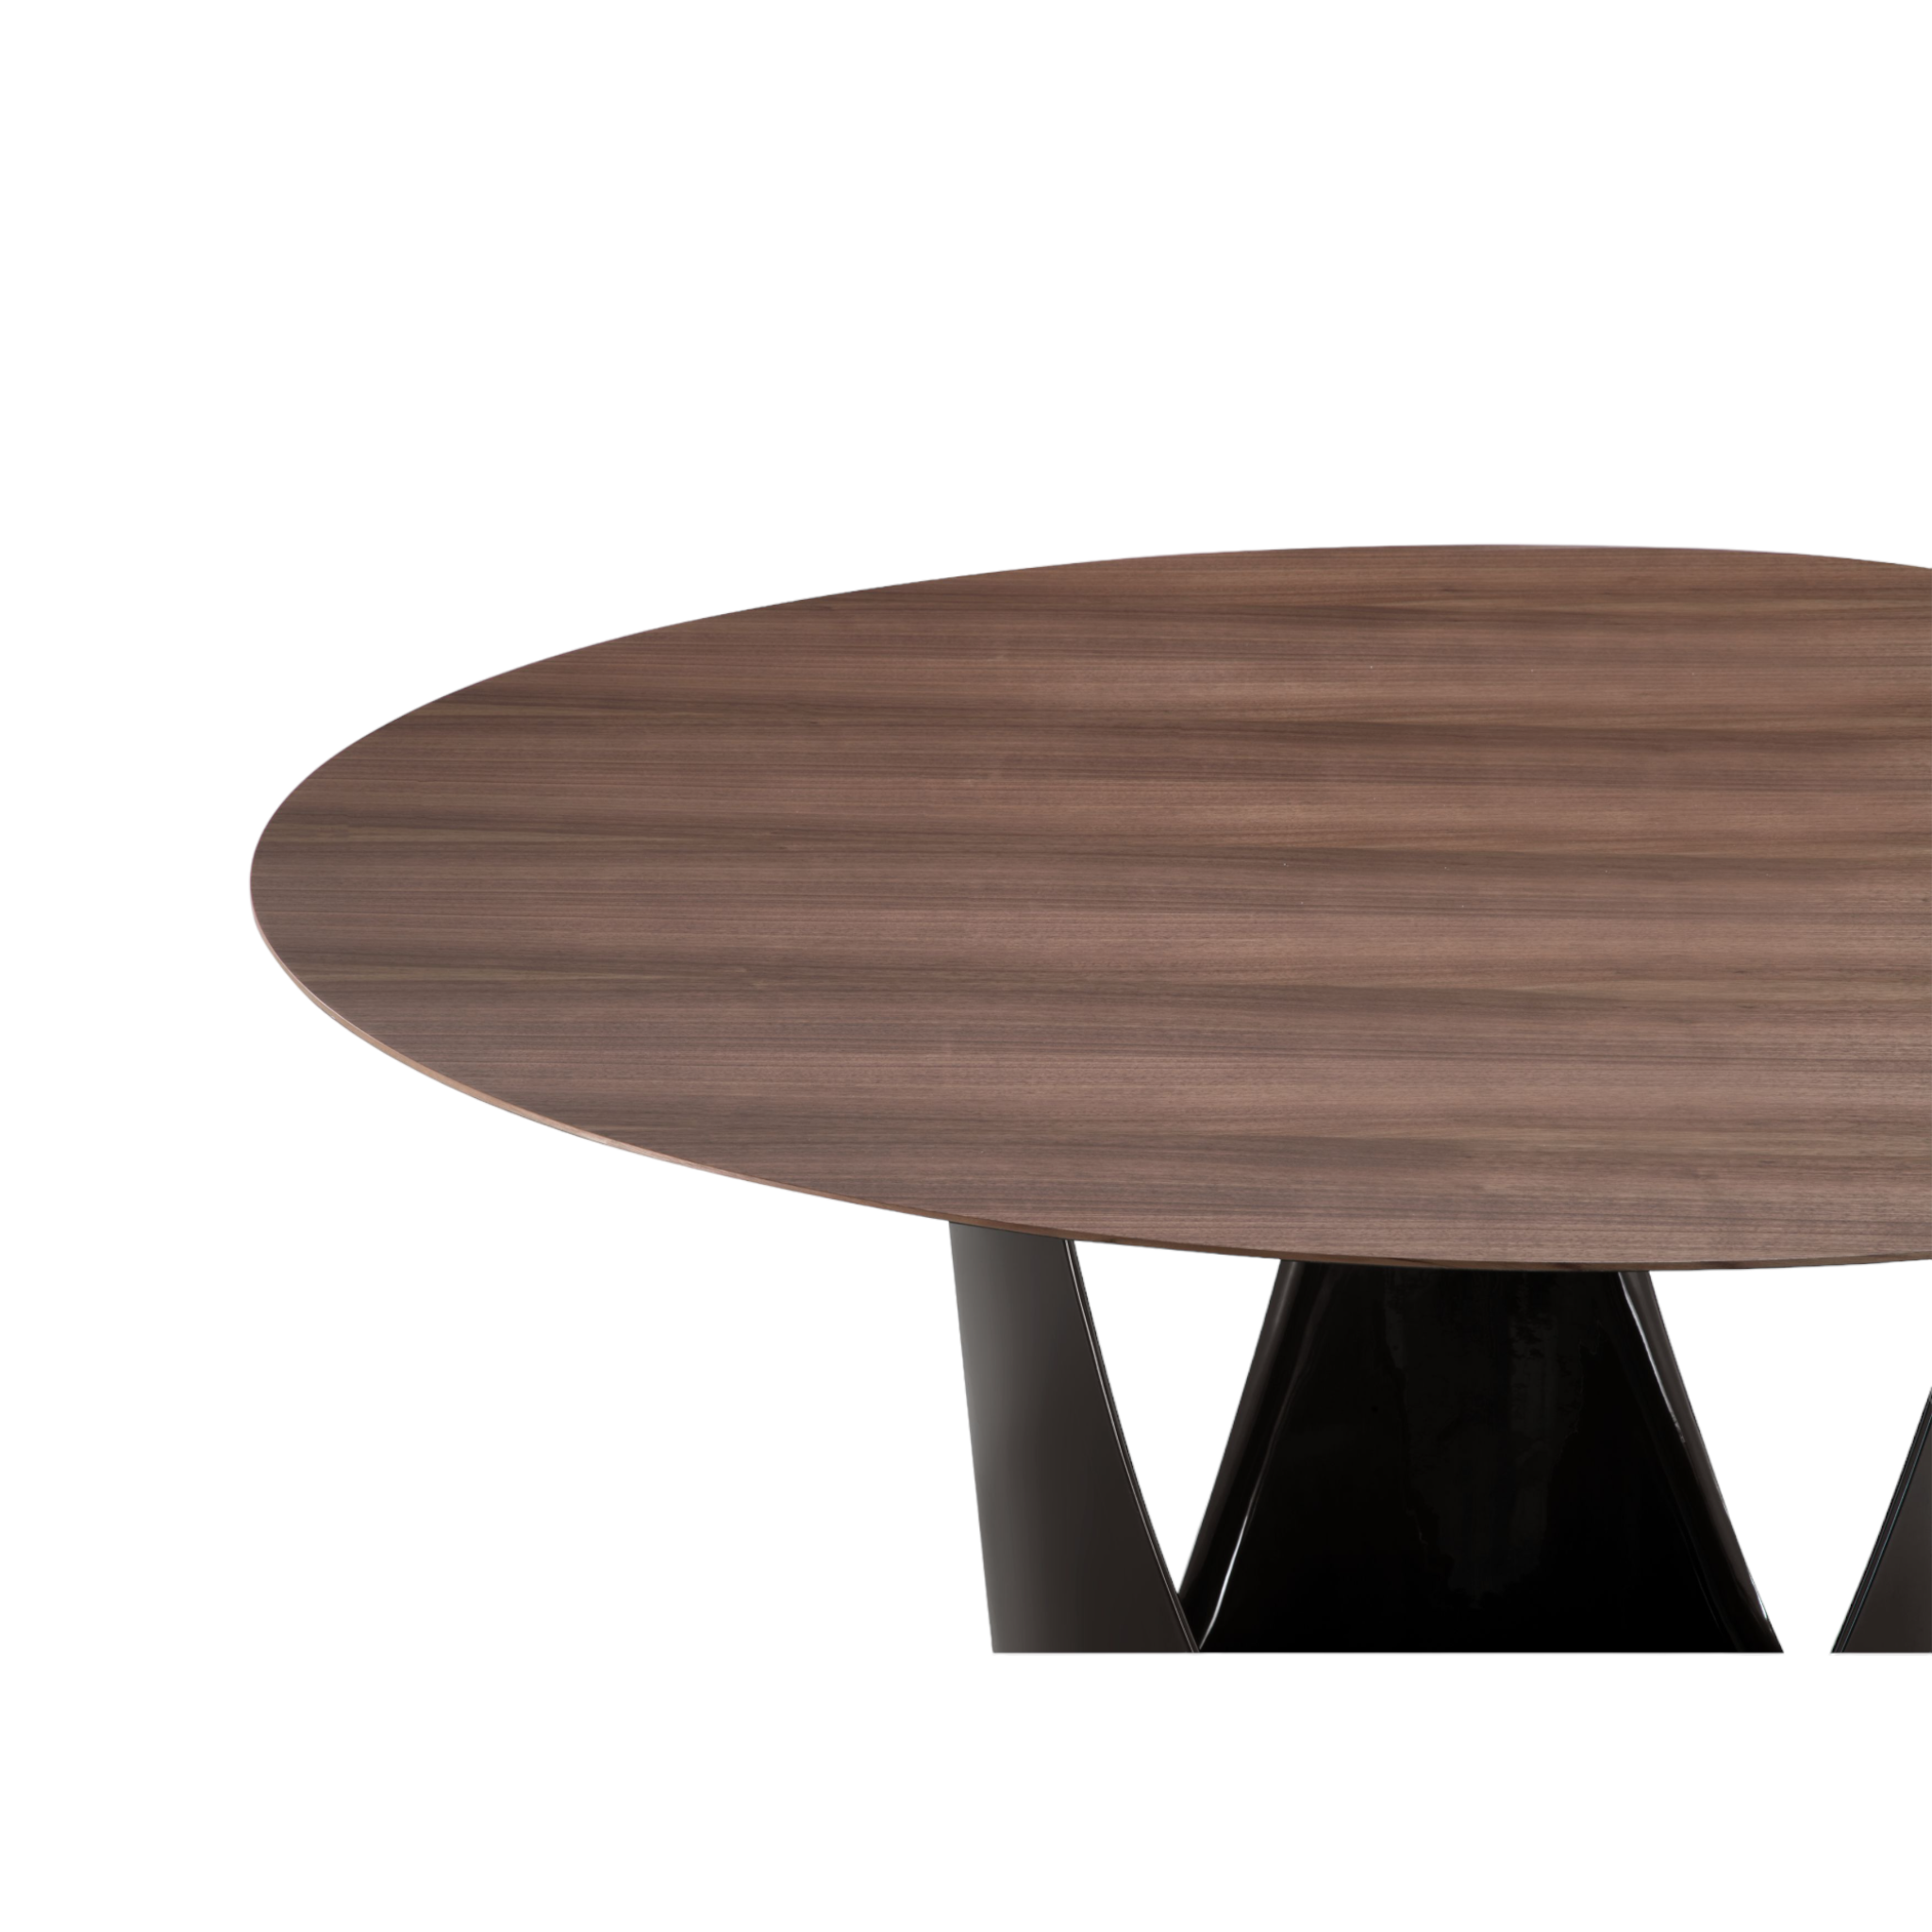 Dodge Round Dining Table